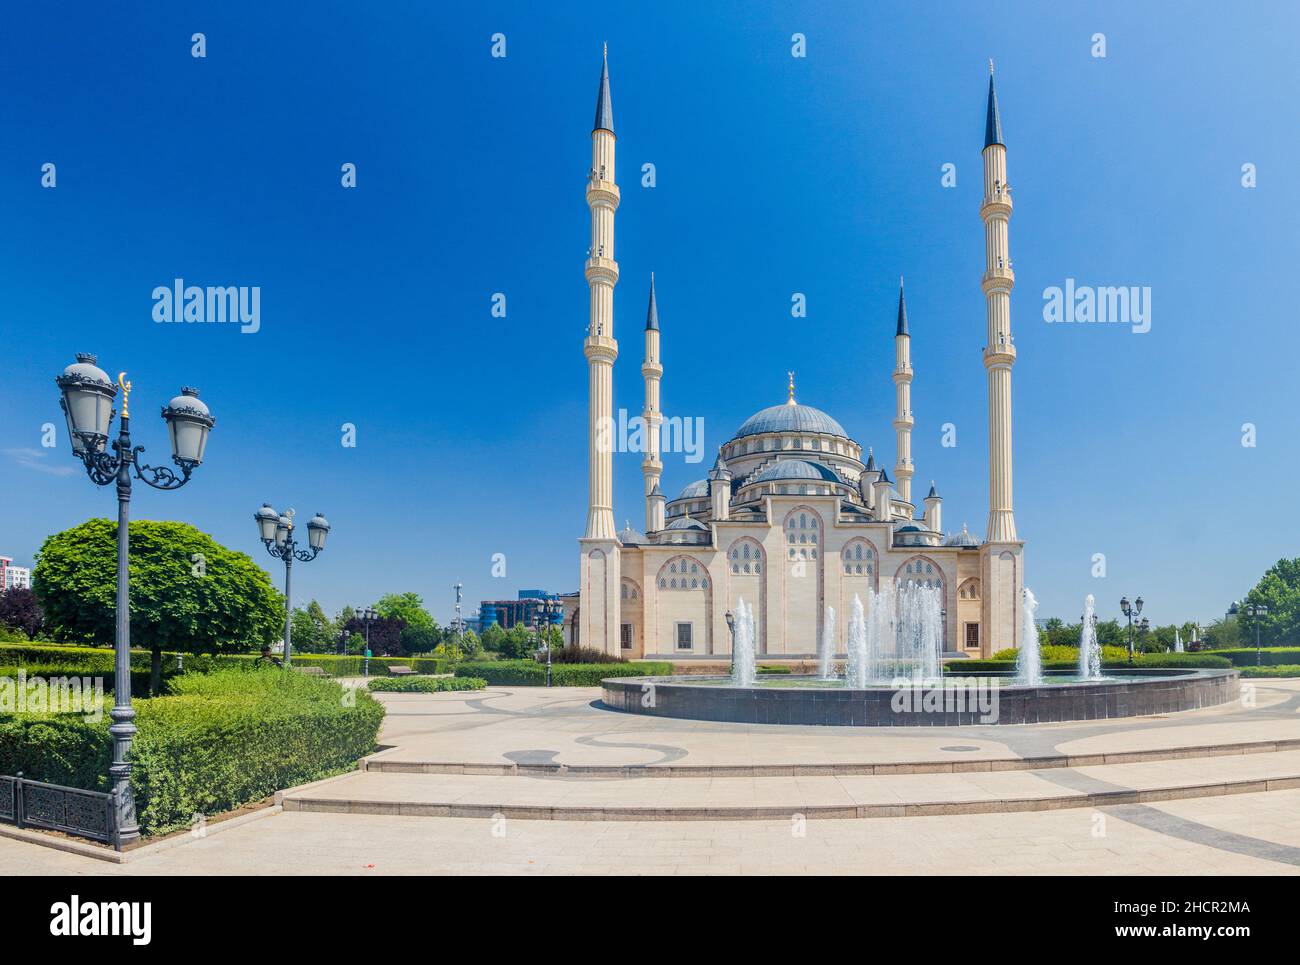 Akhmad Kadyrov Mosque officially known as The Heart of Chechnya in Grozny, Russia Stock Photo